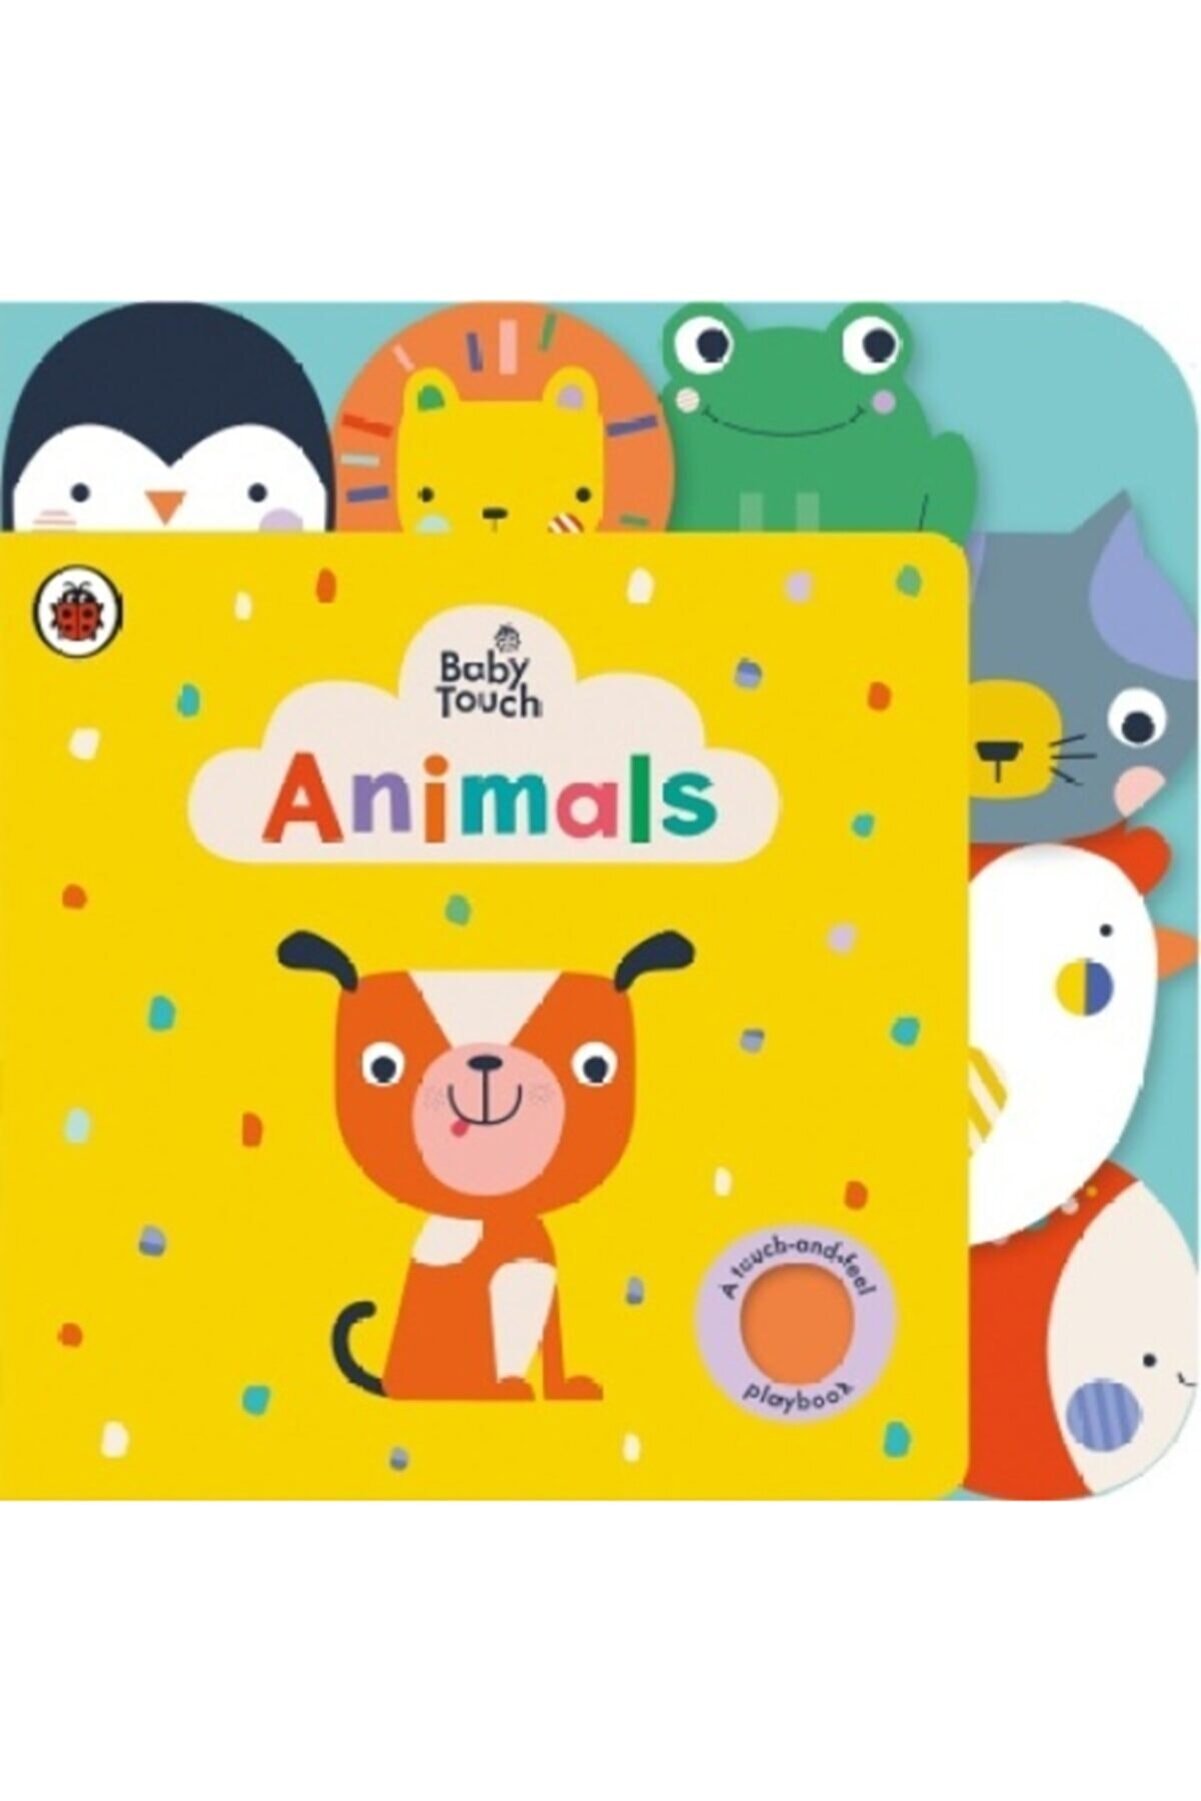 Penguin Books Baby Touch: Animals Tab Book